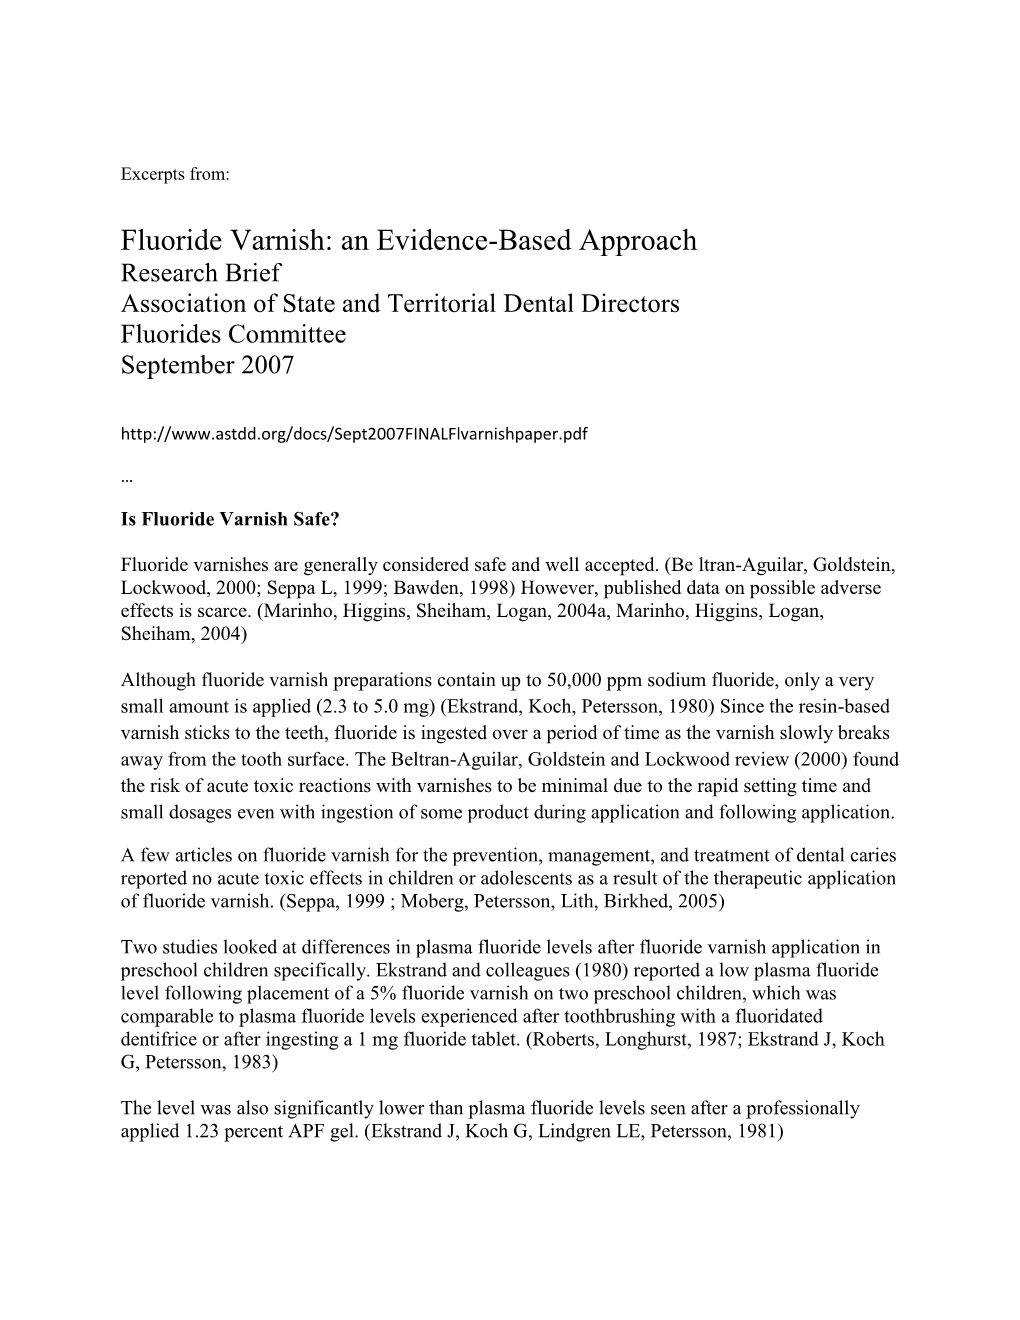 Fluoride Varnish: an Evidence-Based Approach Research Brief Association of State and Territorial Dental Directors Fluorides Committee September 2007